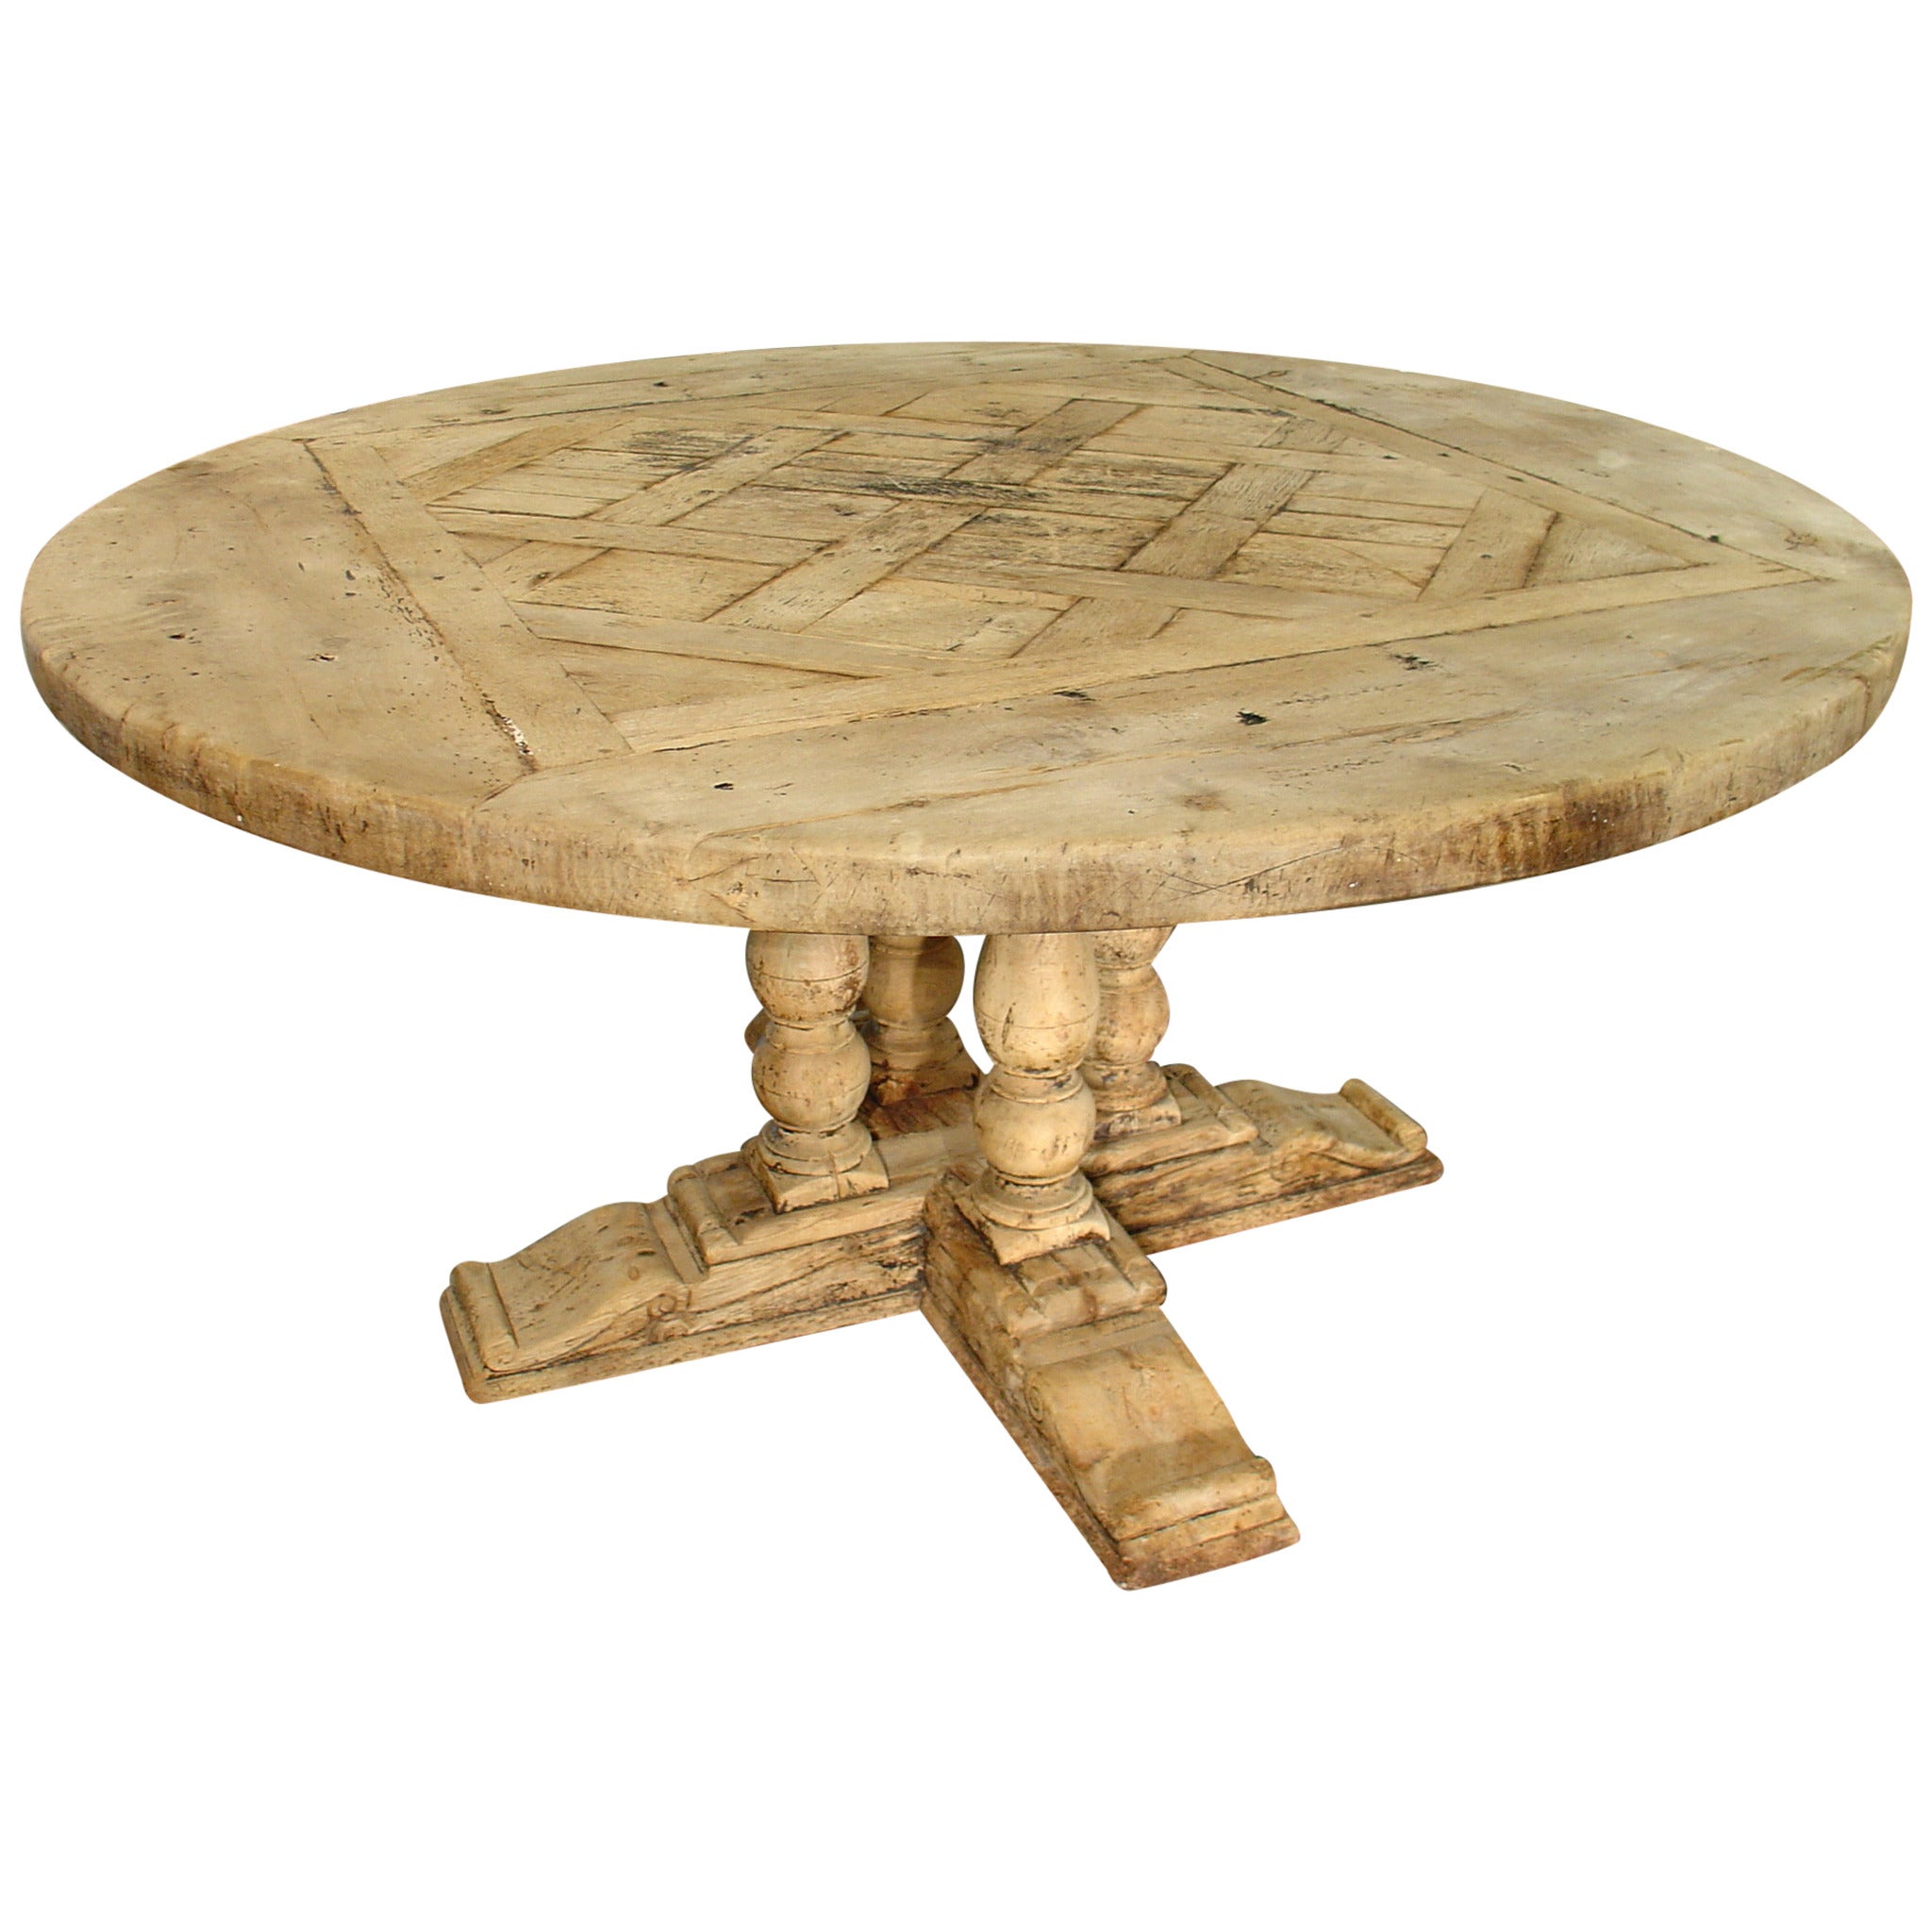 Antique Round Parquet Top Dining Table from France- Bleached Oak and Walnut